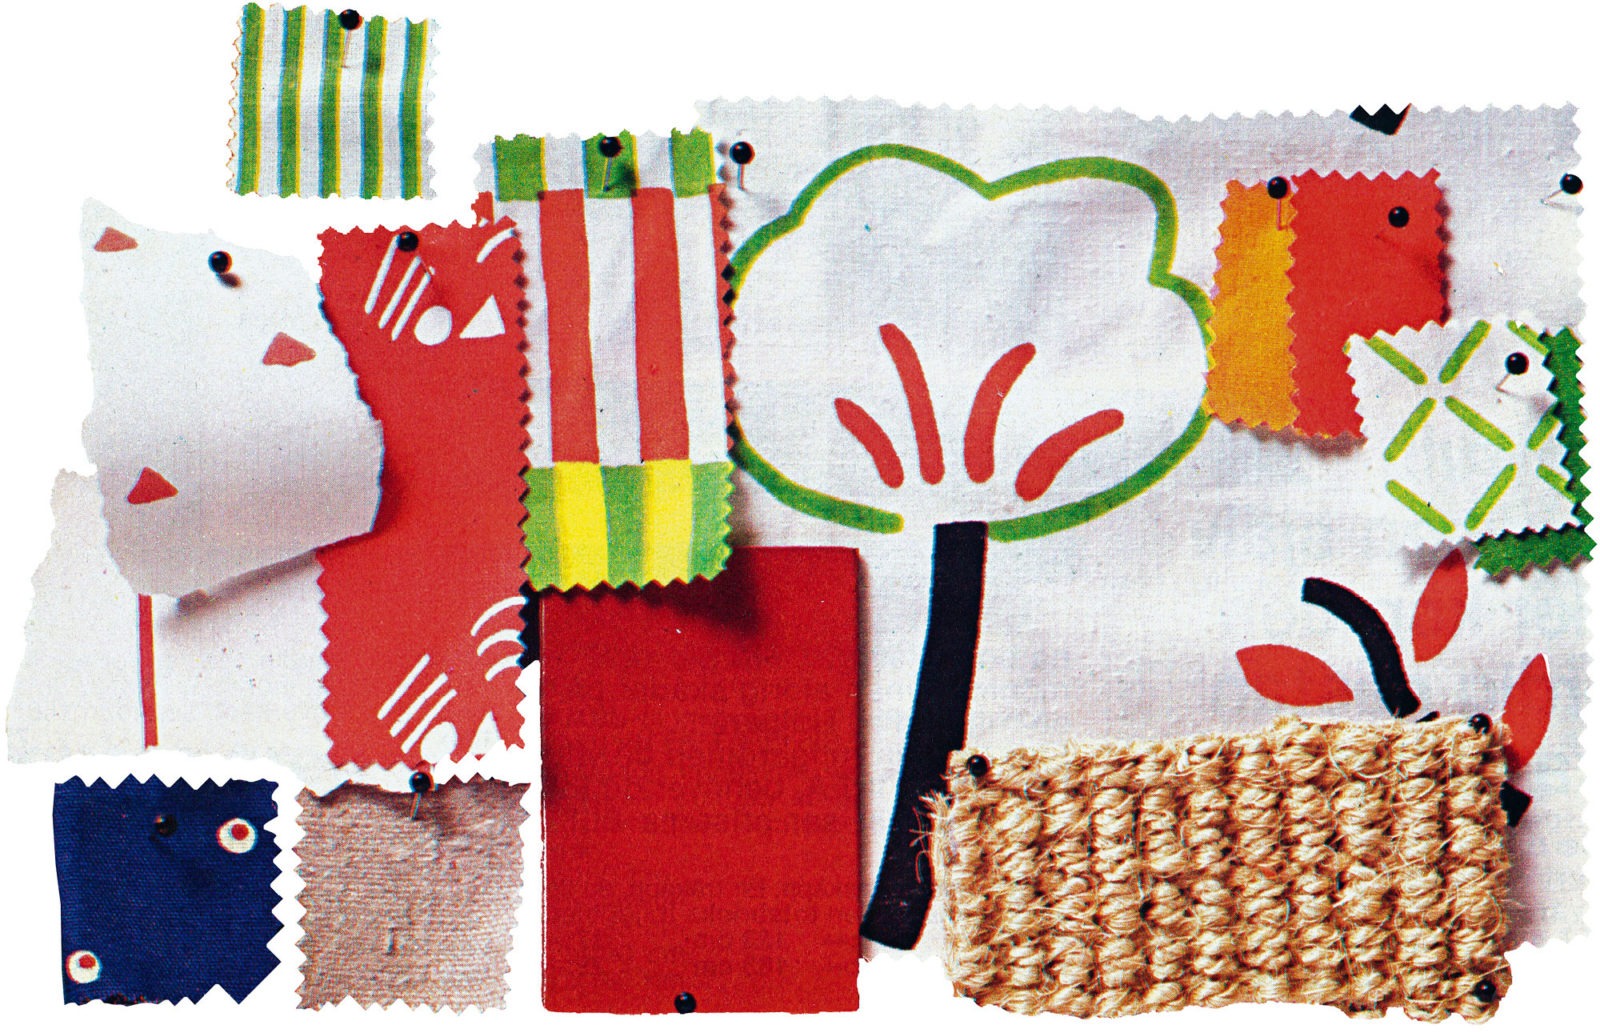 Collage with patches of different fabrics.